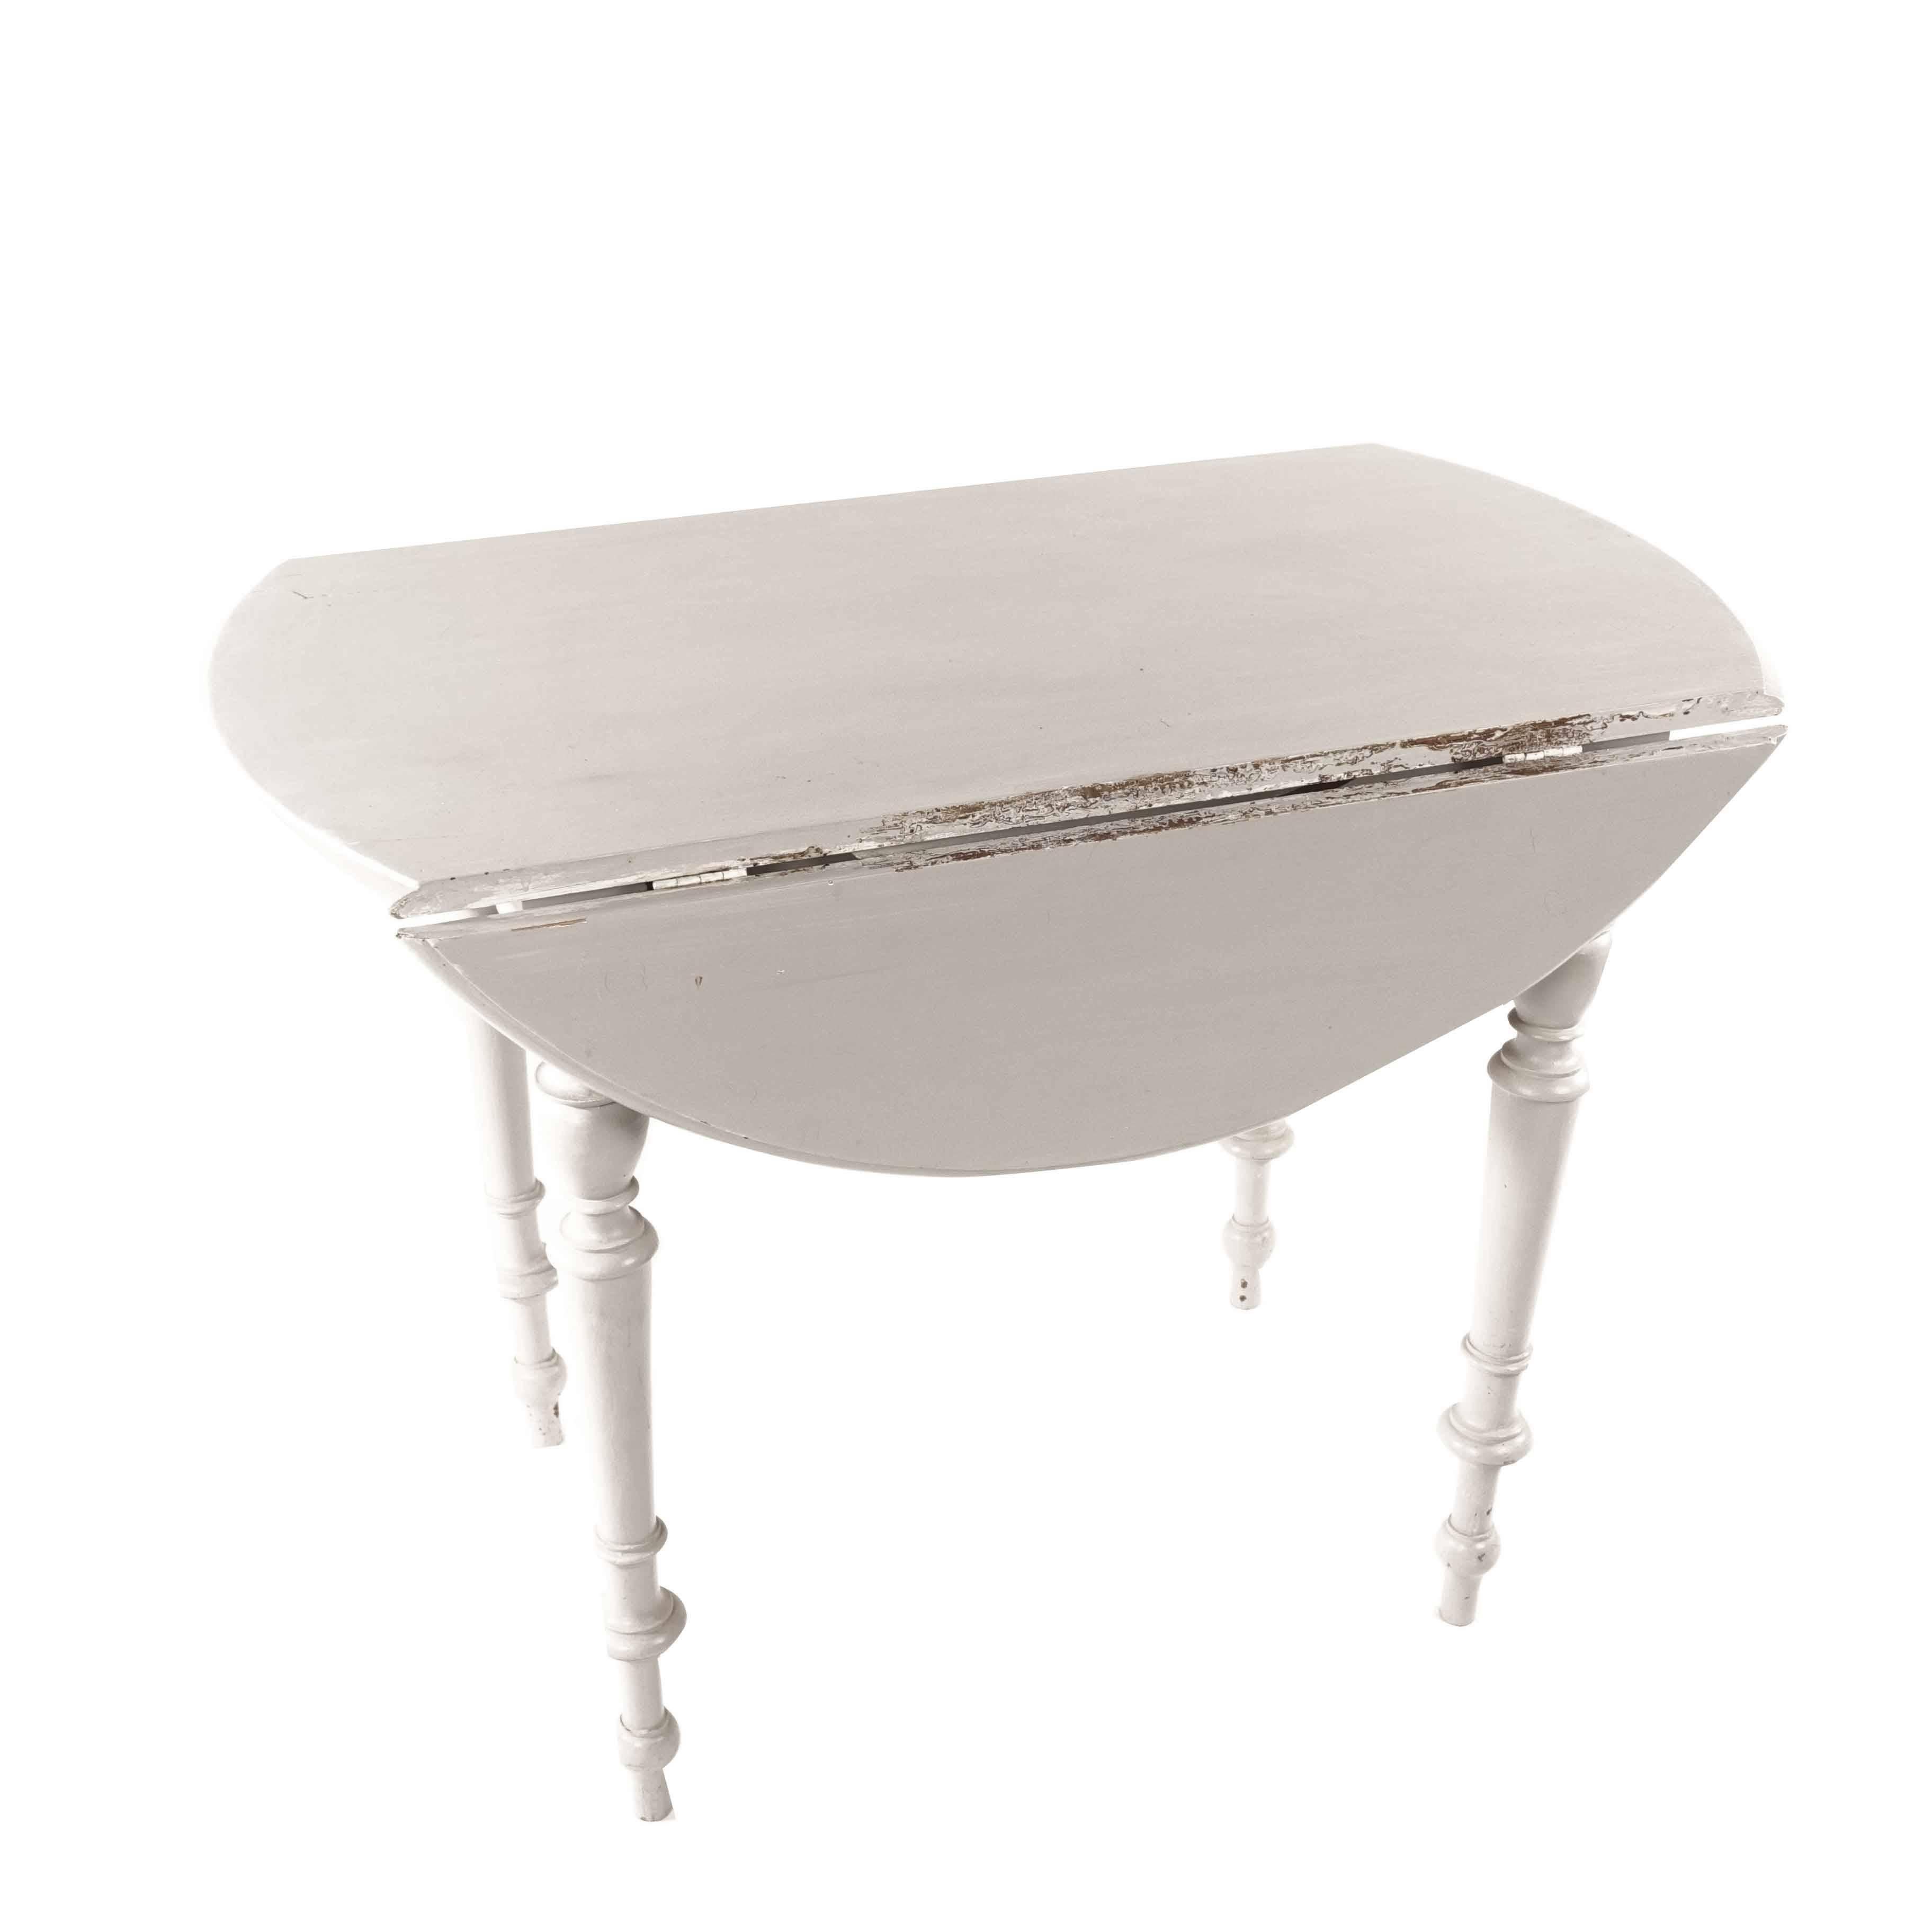 Stunning table that gives both charm and flexibility.
The centrepiece has a small crack, that does not affect the stability, just adds to charm.